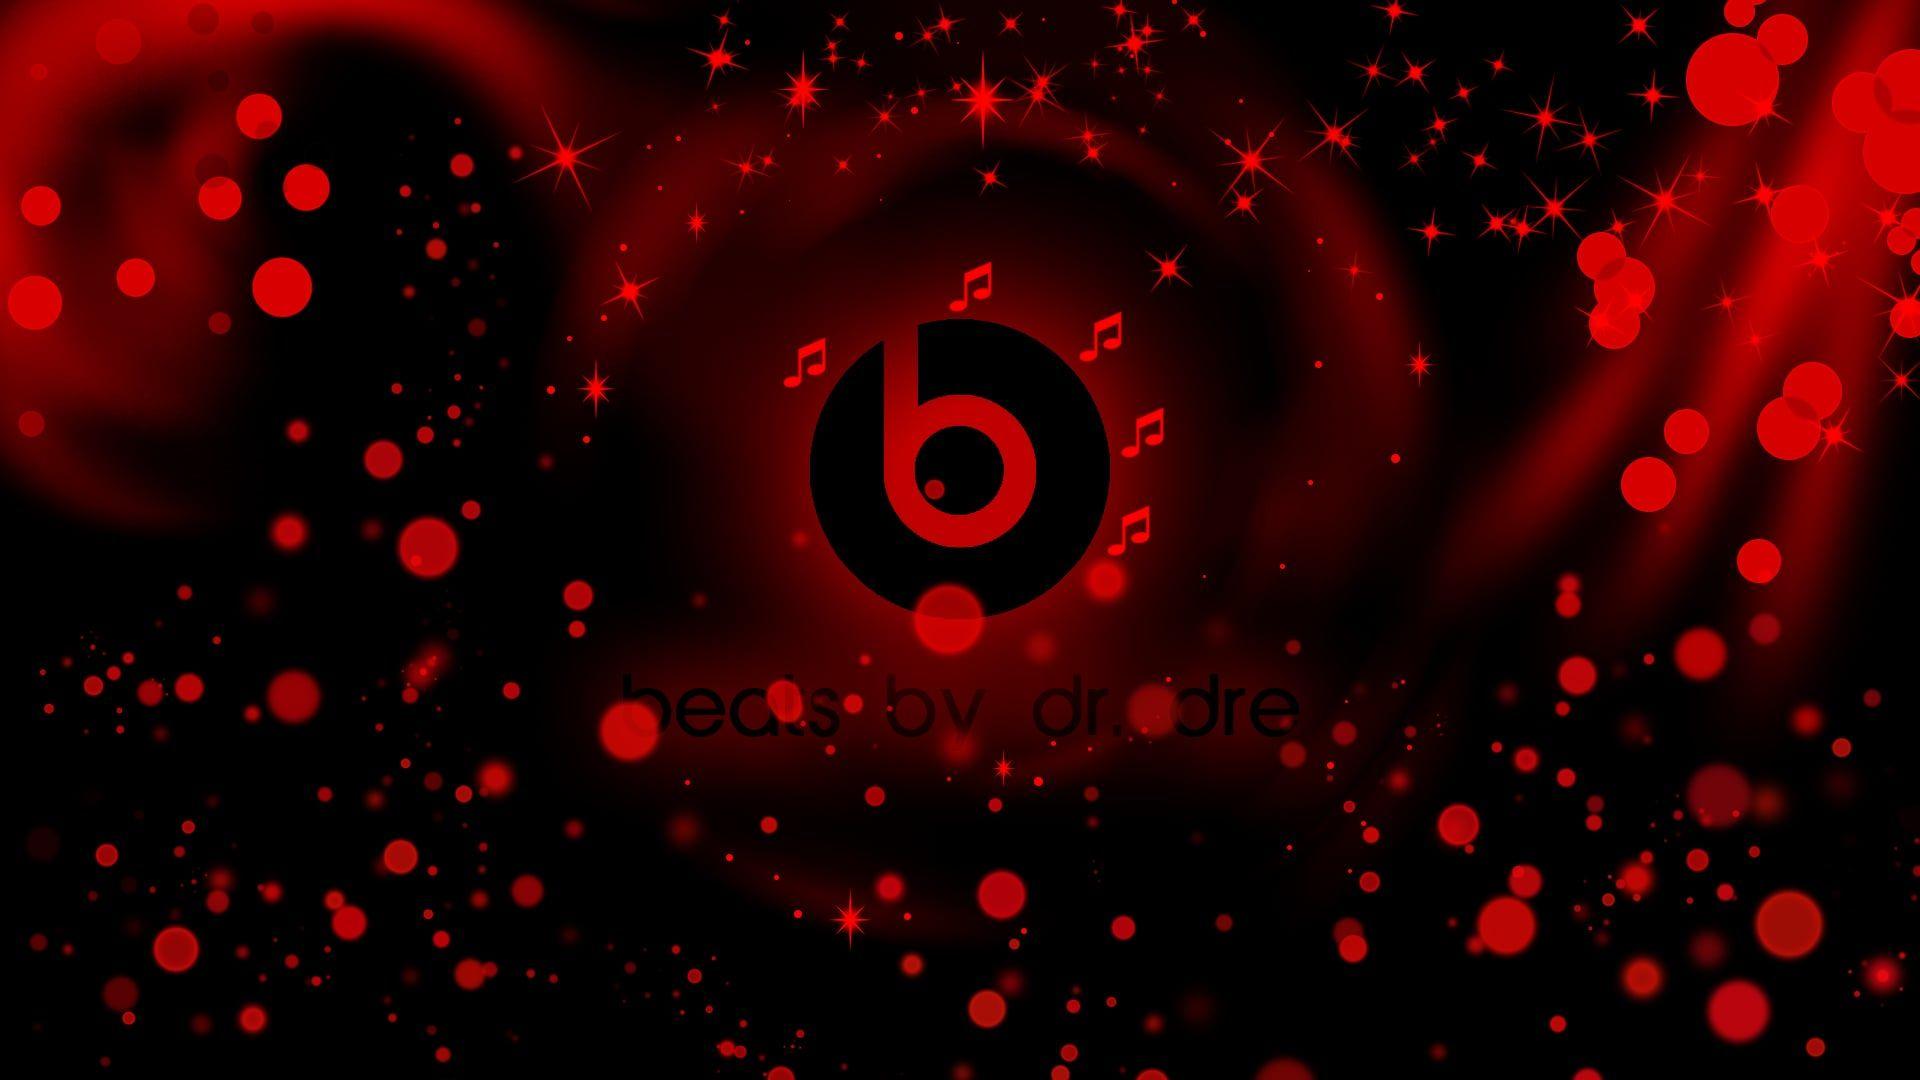 Red Dre Beats Logo - Beats By Dr Dre HD wallpapers Free Download Headphones